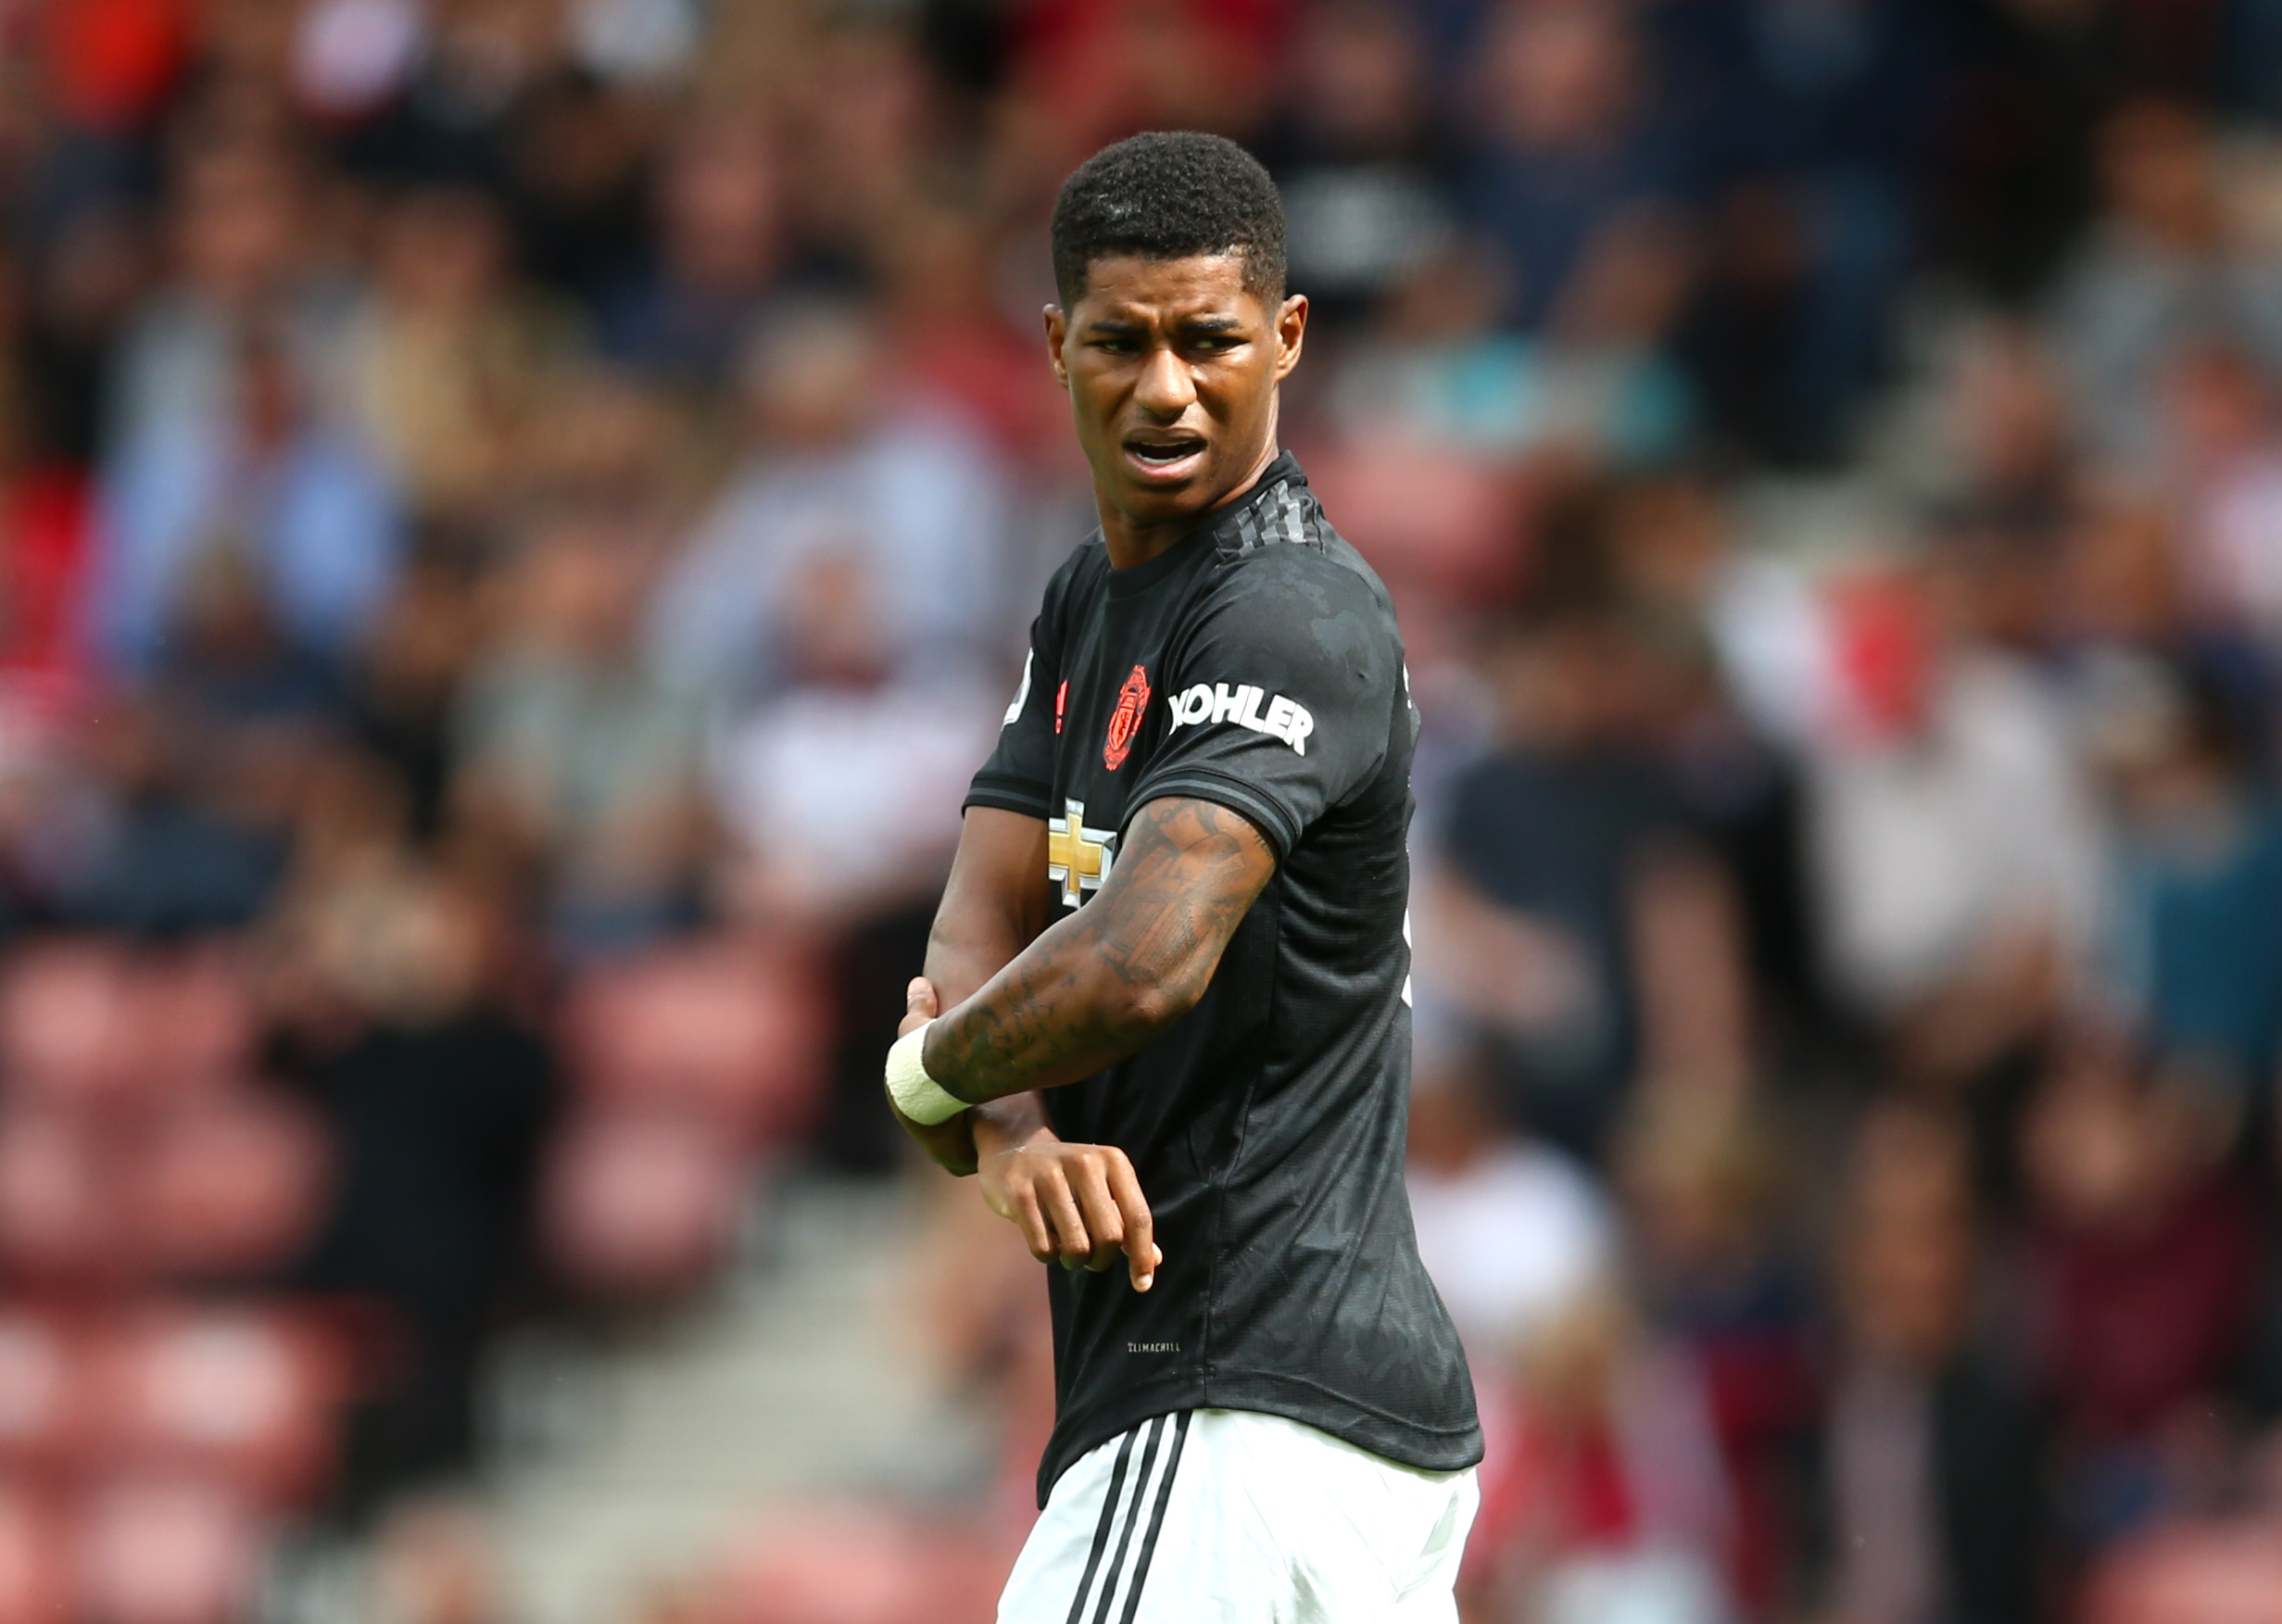 SOUTHAMPTON, ENGLAND - AUGUST 31: Marcus Rashford of Manchester United holds his arm during the Premier League match between Southampton FC and Manchester United at St Mary's Stadium on August 31, 2019 in Southampton, United Kingdom. (Photo by Steve Bardens/Getty Images)